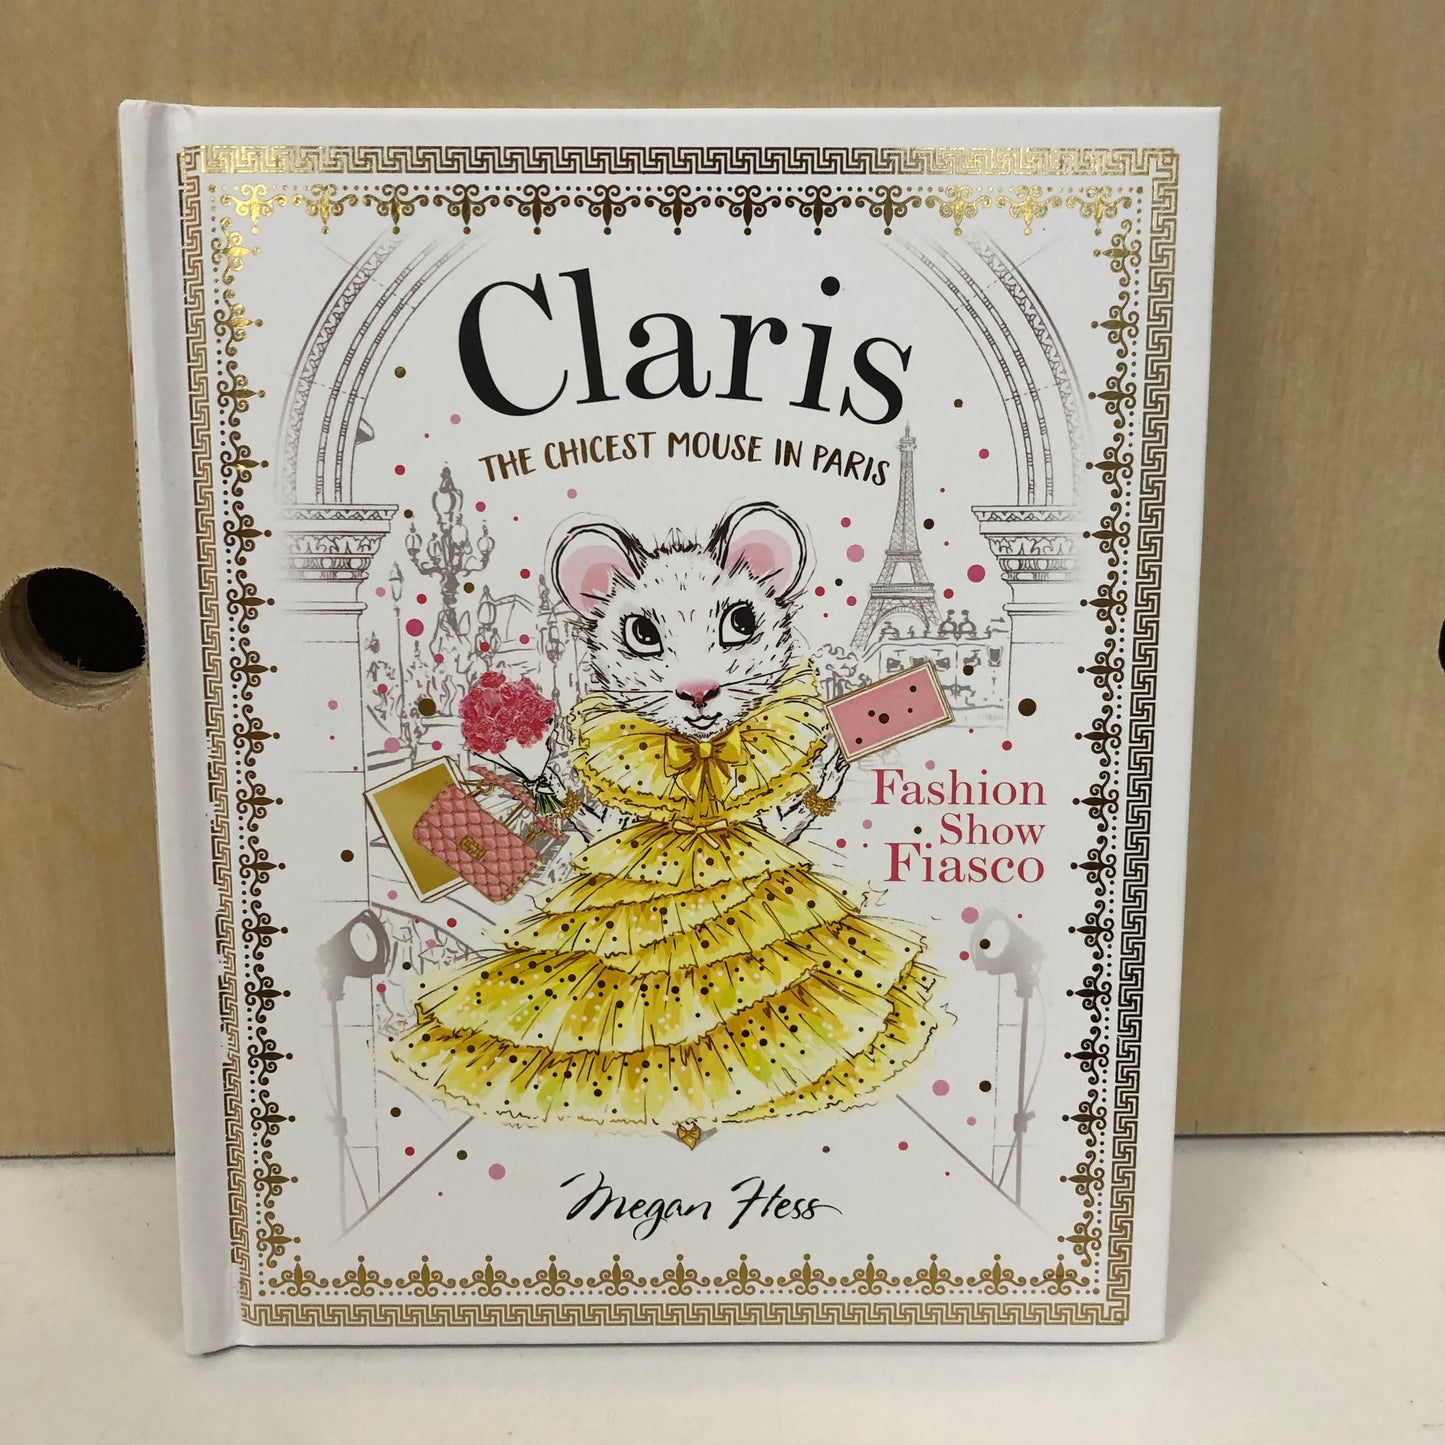 Claris the Chicest Mouse in Pa